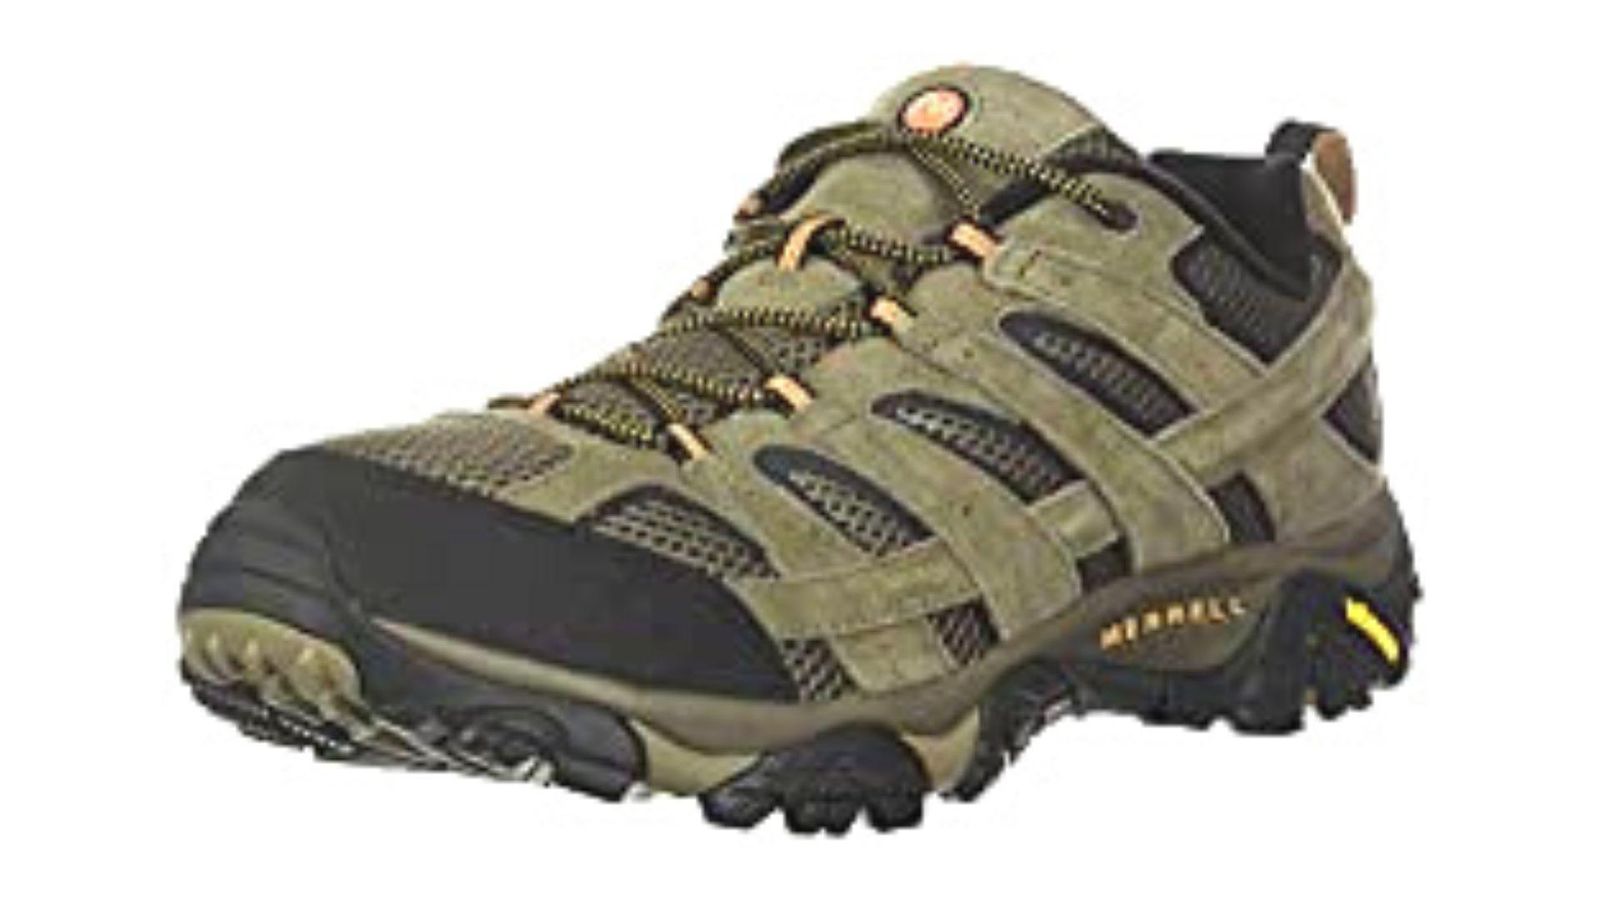 amazon mens hiking boots, best budget hiking boots, best hiking boots 2022, best hiking boots australia, best hiking boots for ankle support, best hiking boots for flat feet, best hiking boots for men, best hiking boots for men 2022, Best Hiking Boots for Men in 2022 | Most Comfortable Hiking Boots men, best hiking boots for plantar fasciitis, best hiking boots for seniors, best hiking boots for wide feet, best hiking boots for winter, best hiking boots of all-time, best hiking boots reddit, best hiking boots uk, best hiking boots women, best hiking hunting boots, best hiking shoes, best hiking shoes for men 2022, best hiking sneakers mens, best leather hiking boots, best lightweight hiking boots, best men's hiking boots, best men's hiking boots 2022, best men's hiking boots for wide feet, best men's winter hiking boots, best mens walking boots, best mens walking boots 2022, best mens waterproof walking boots, best tactical hiking boots, best walking boots for men, best waterproof hiking boots, best waterproof hiking boots for men, best winter hiking boots, best women's hiking boots, best women's hiking boots 2022, cheap hiking boots mens, good hiking boots for men, good walking boots mens, hiking shoes for men, lightweight waterproof hiking boots, lowa renegade gtx best price, men's lightweight hiking boots, mens hiking boot review, mens lightweight walking boots, merrell moab 2 gtx best price, most comfortable hiking boots for men, most comfortable hiking boots mens, most comfortable men's hiking boots, most comfortable men's waterproof work boots, most comfortable mens rain boots, most comfortable mens snow boots, most comfortable mens walking boots, most comfortable mens waterproof boots, most comfortable mens waterproof hiking boots, most comfortable mens winter boots for walking, most comfortable snow boots for men, most comfortable snow boots mens, most comfortable walking boots mens, most comfortable waterproof boots for men, most comfortable waterproof boots menmost comfortable winter boots for men, most comfortable waterproof steel toe boots, most comfortable waterproof work boots, most comfortable winter shoes men, outdoor magazine best hiking boots, salomon hiking boots, salomon quest 4d 3 gtx best price, stylish hiking boots men, the best hiking boots for men, the best hiking boots reading answers, top hiking boots for men, waterproof hiking boots for men, what brand is best for hiking boots